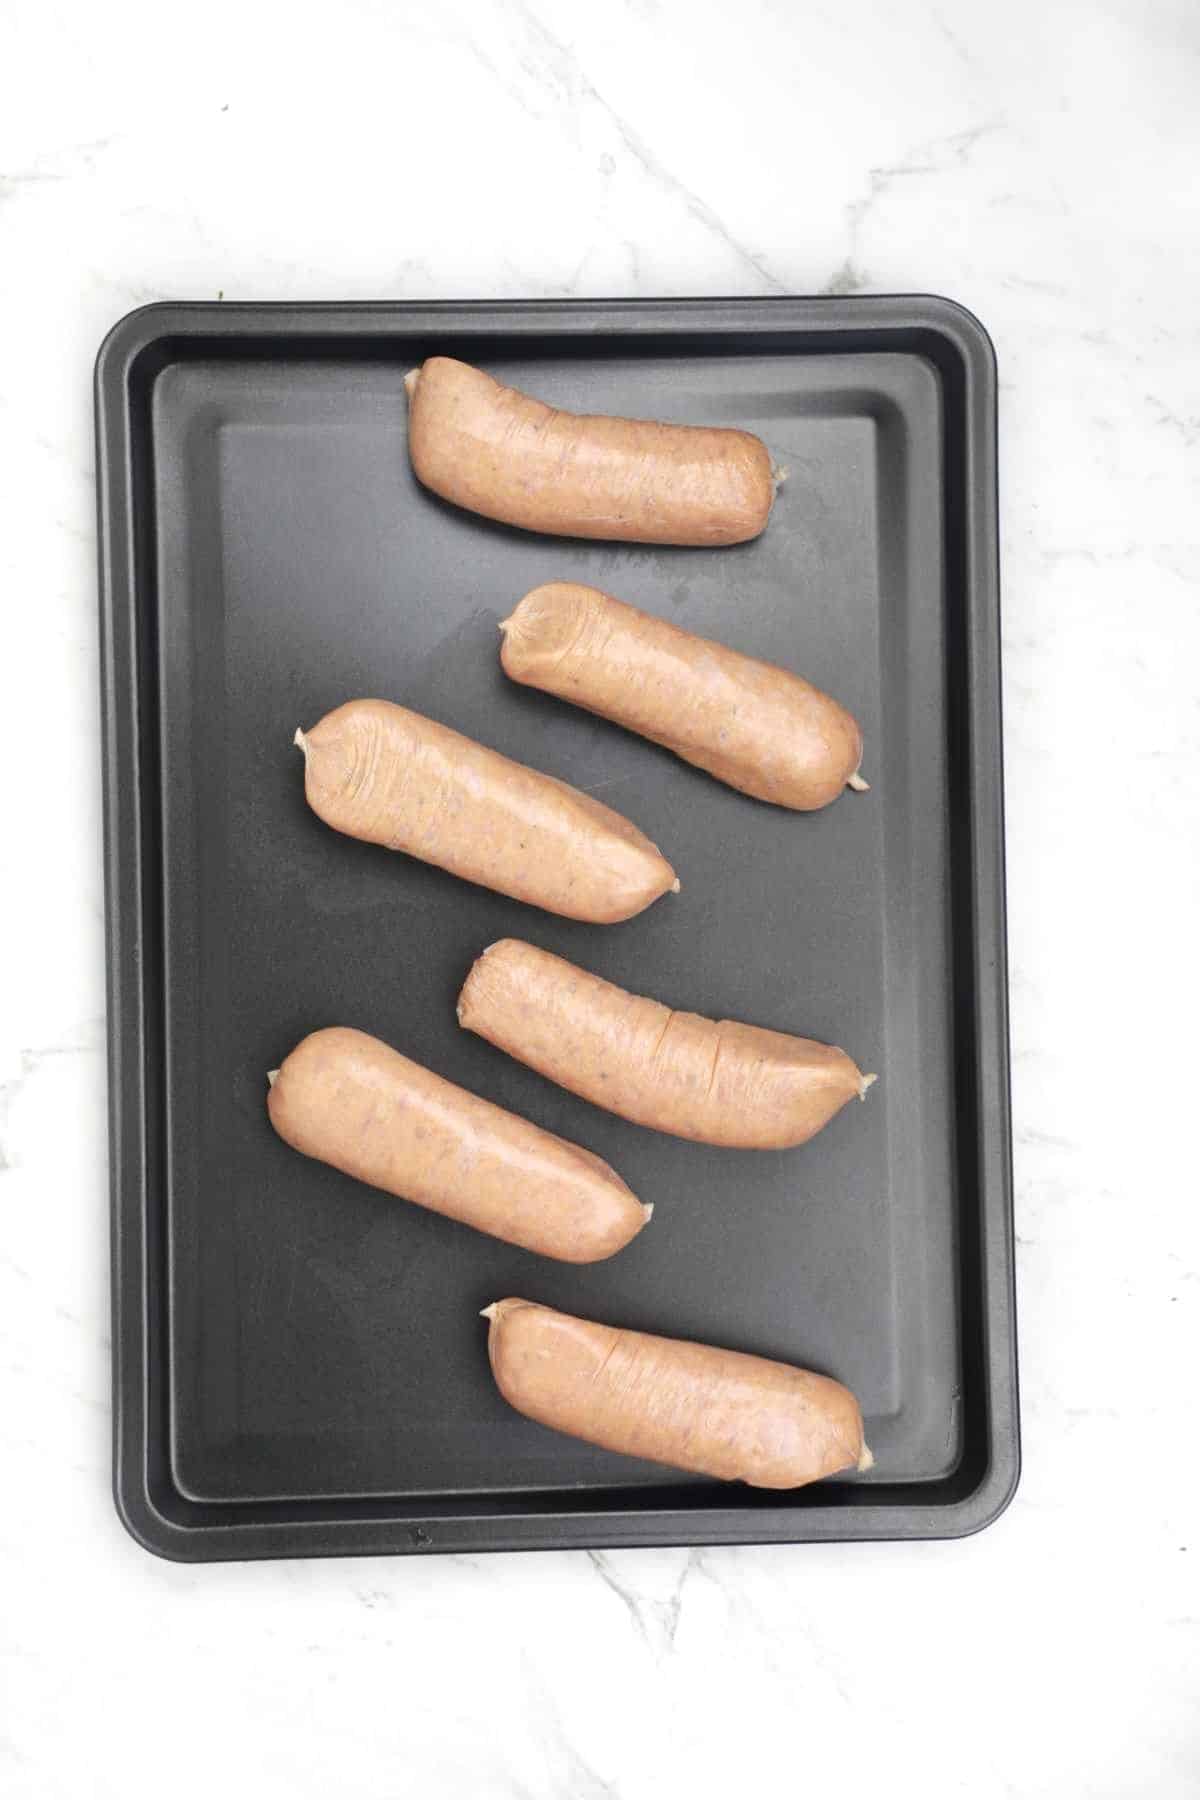 sausages on a baking tray.